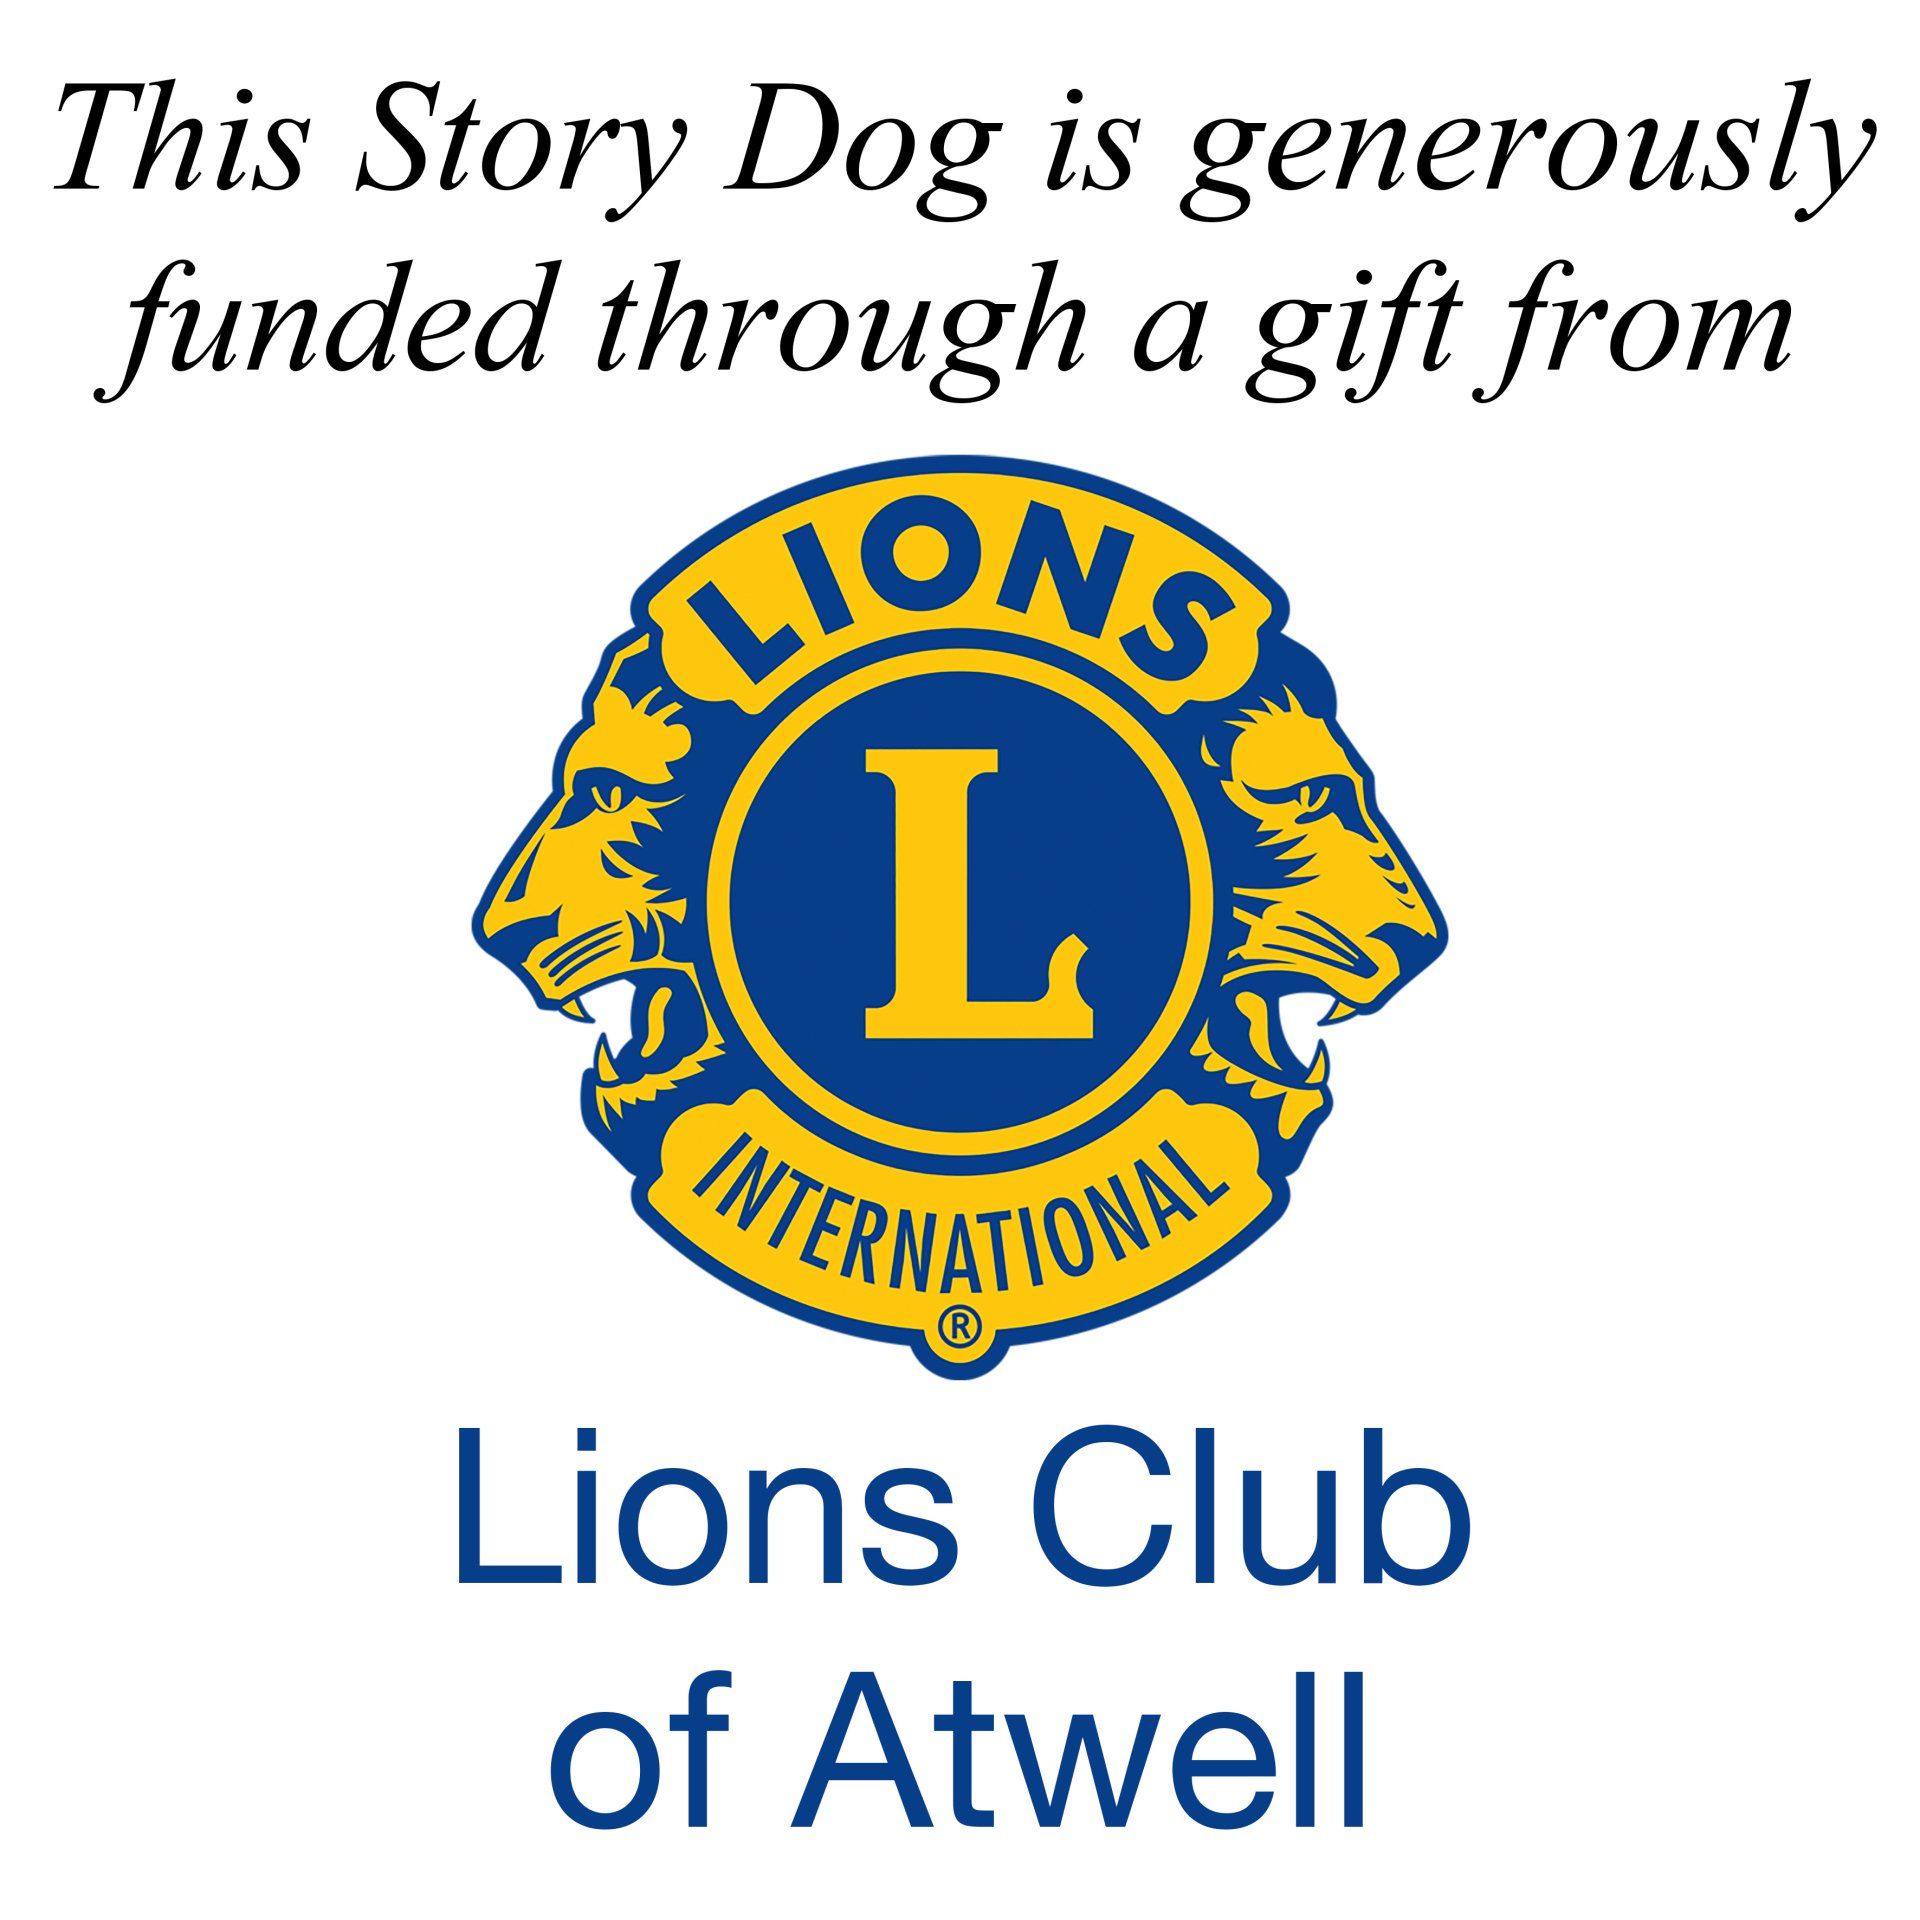 Lions Club of Atwell